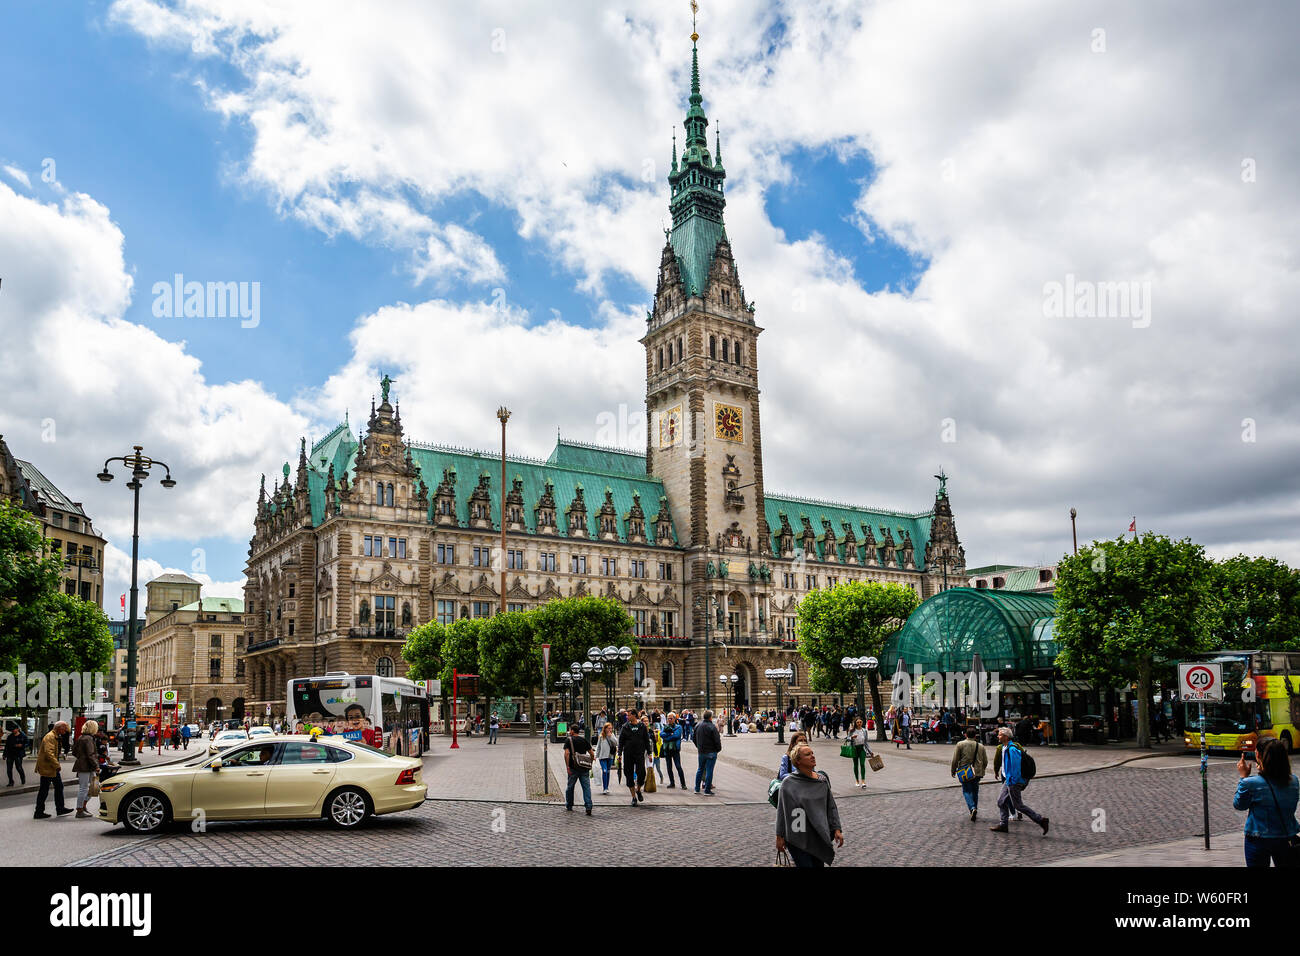 Neo Renaissance Town Hall or Rathaus in Hamburg, Germany on 16 July 2019 Stock Photo